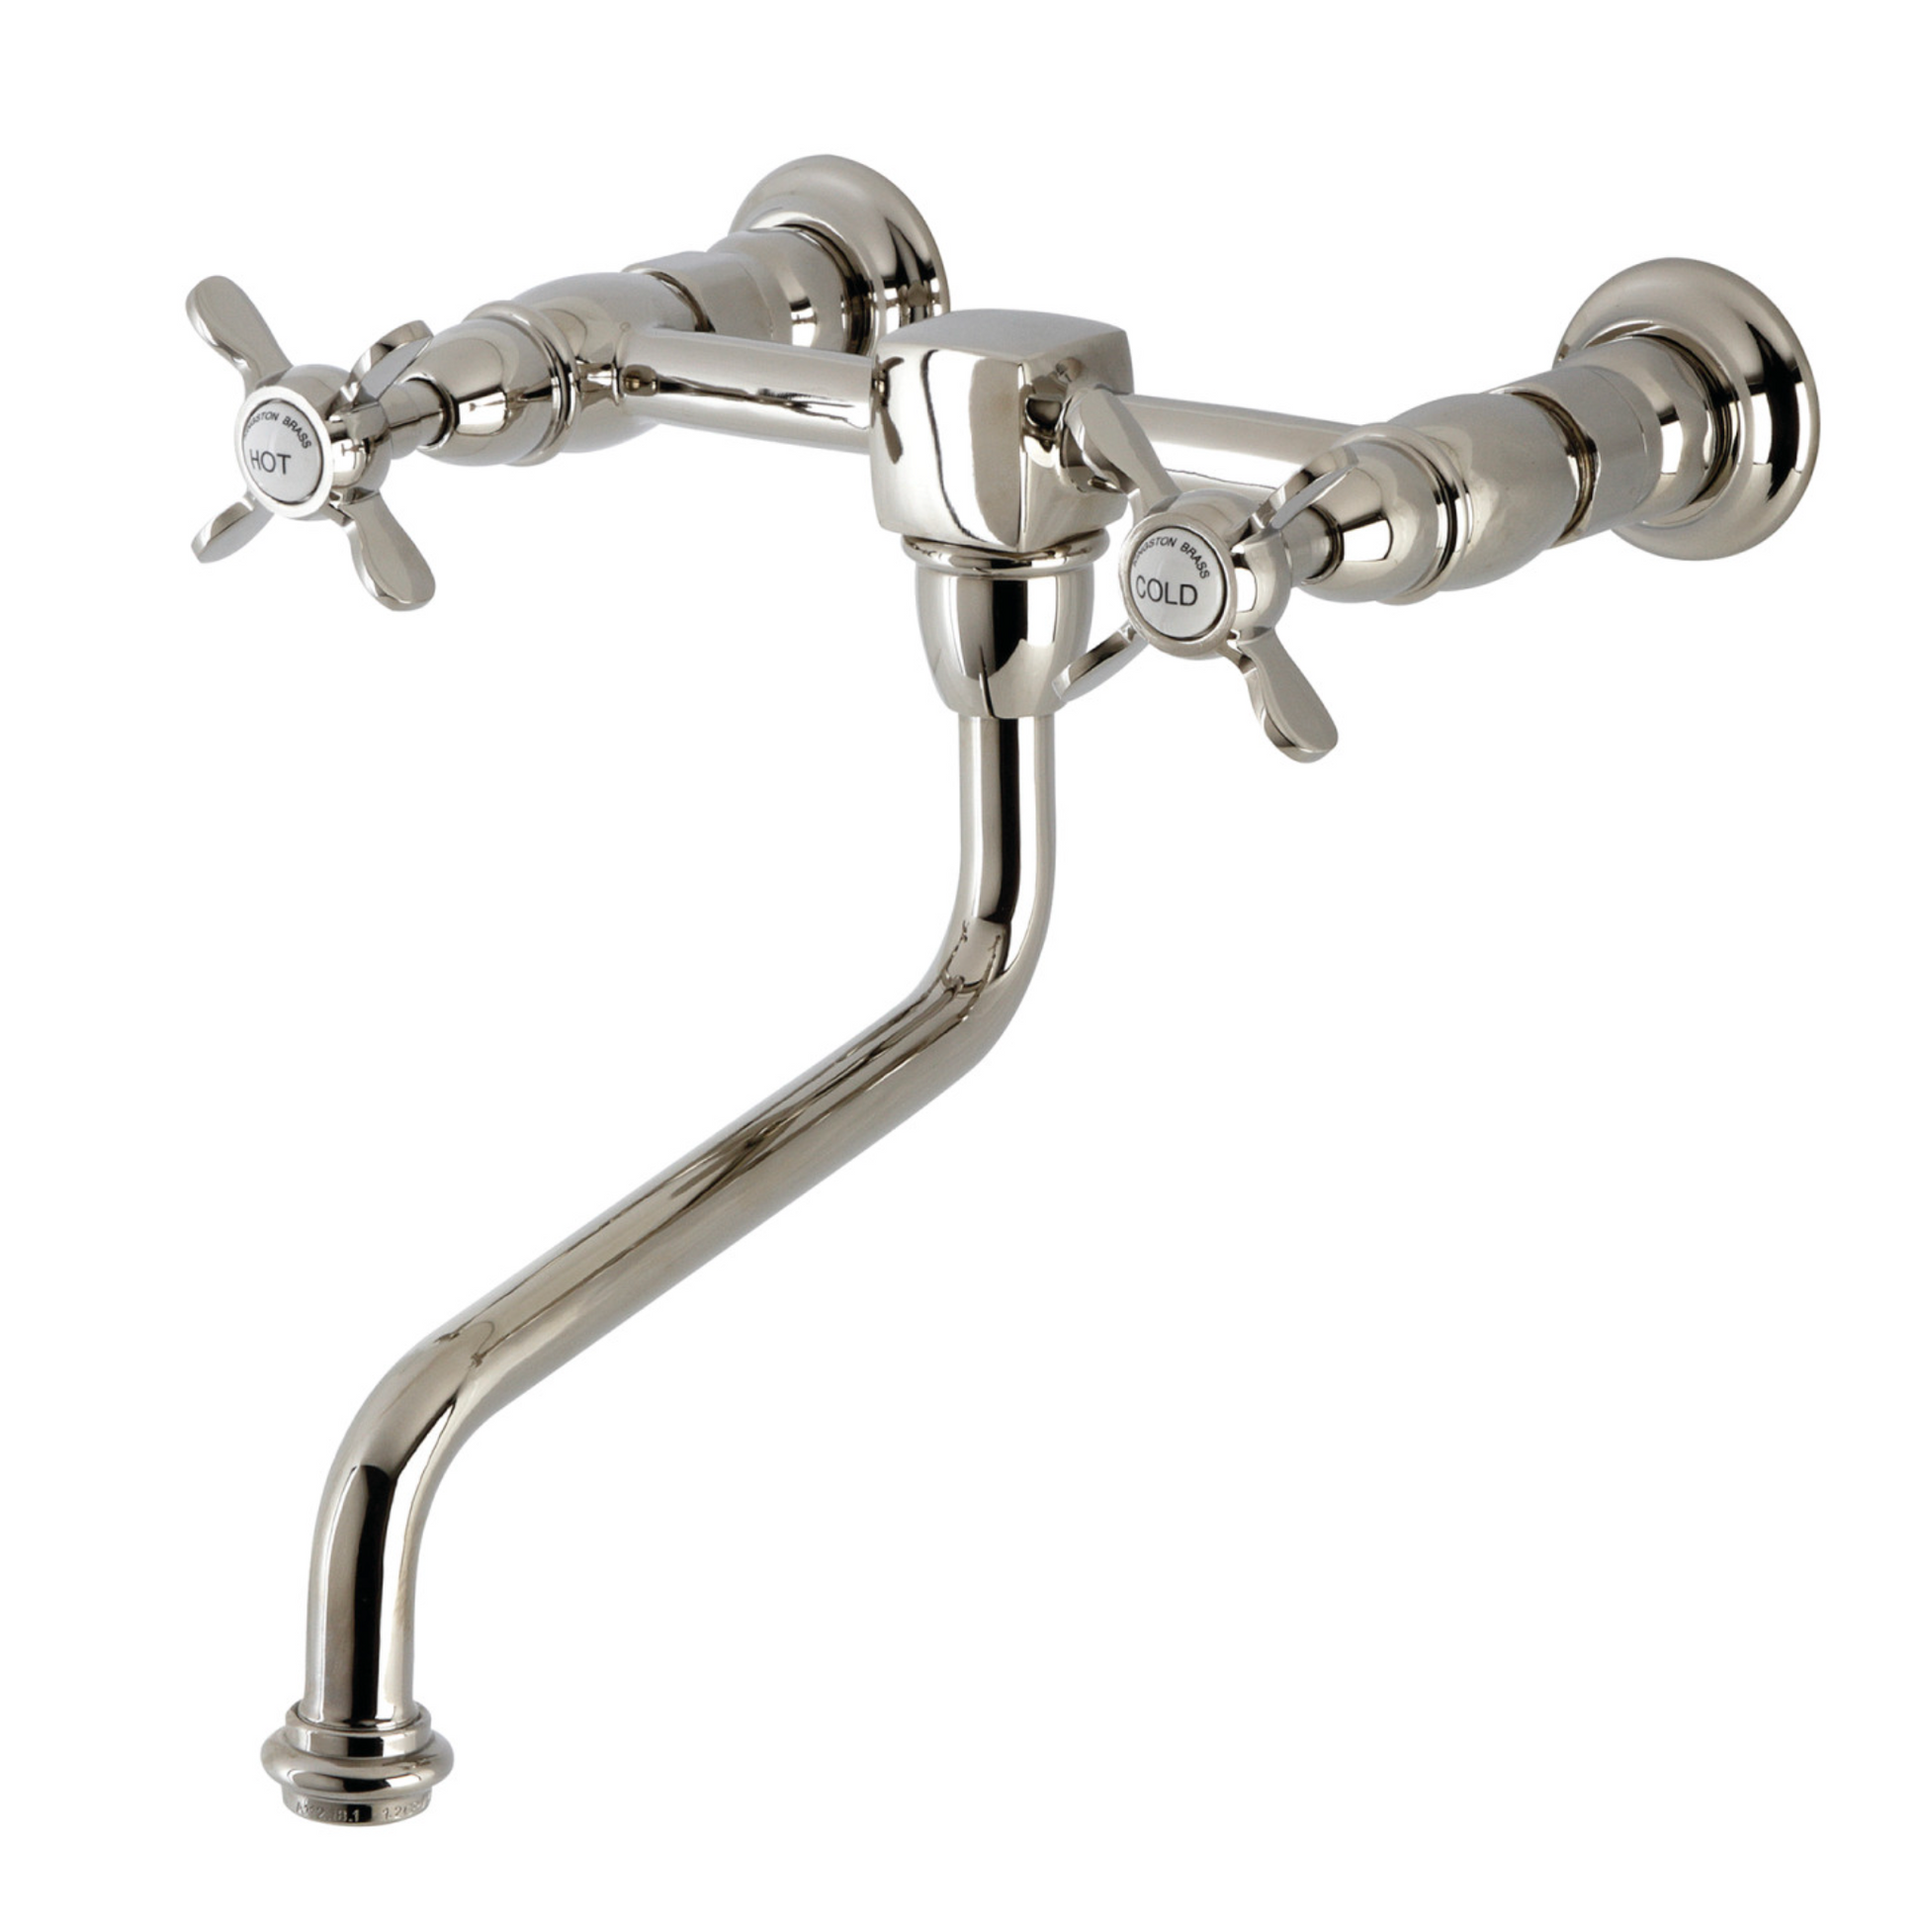 Our Wall Mounted Bathroom Faucets